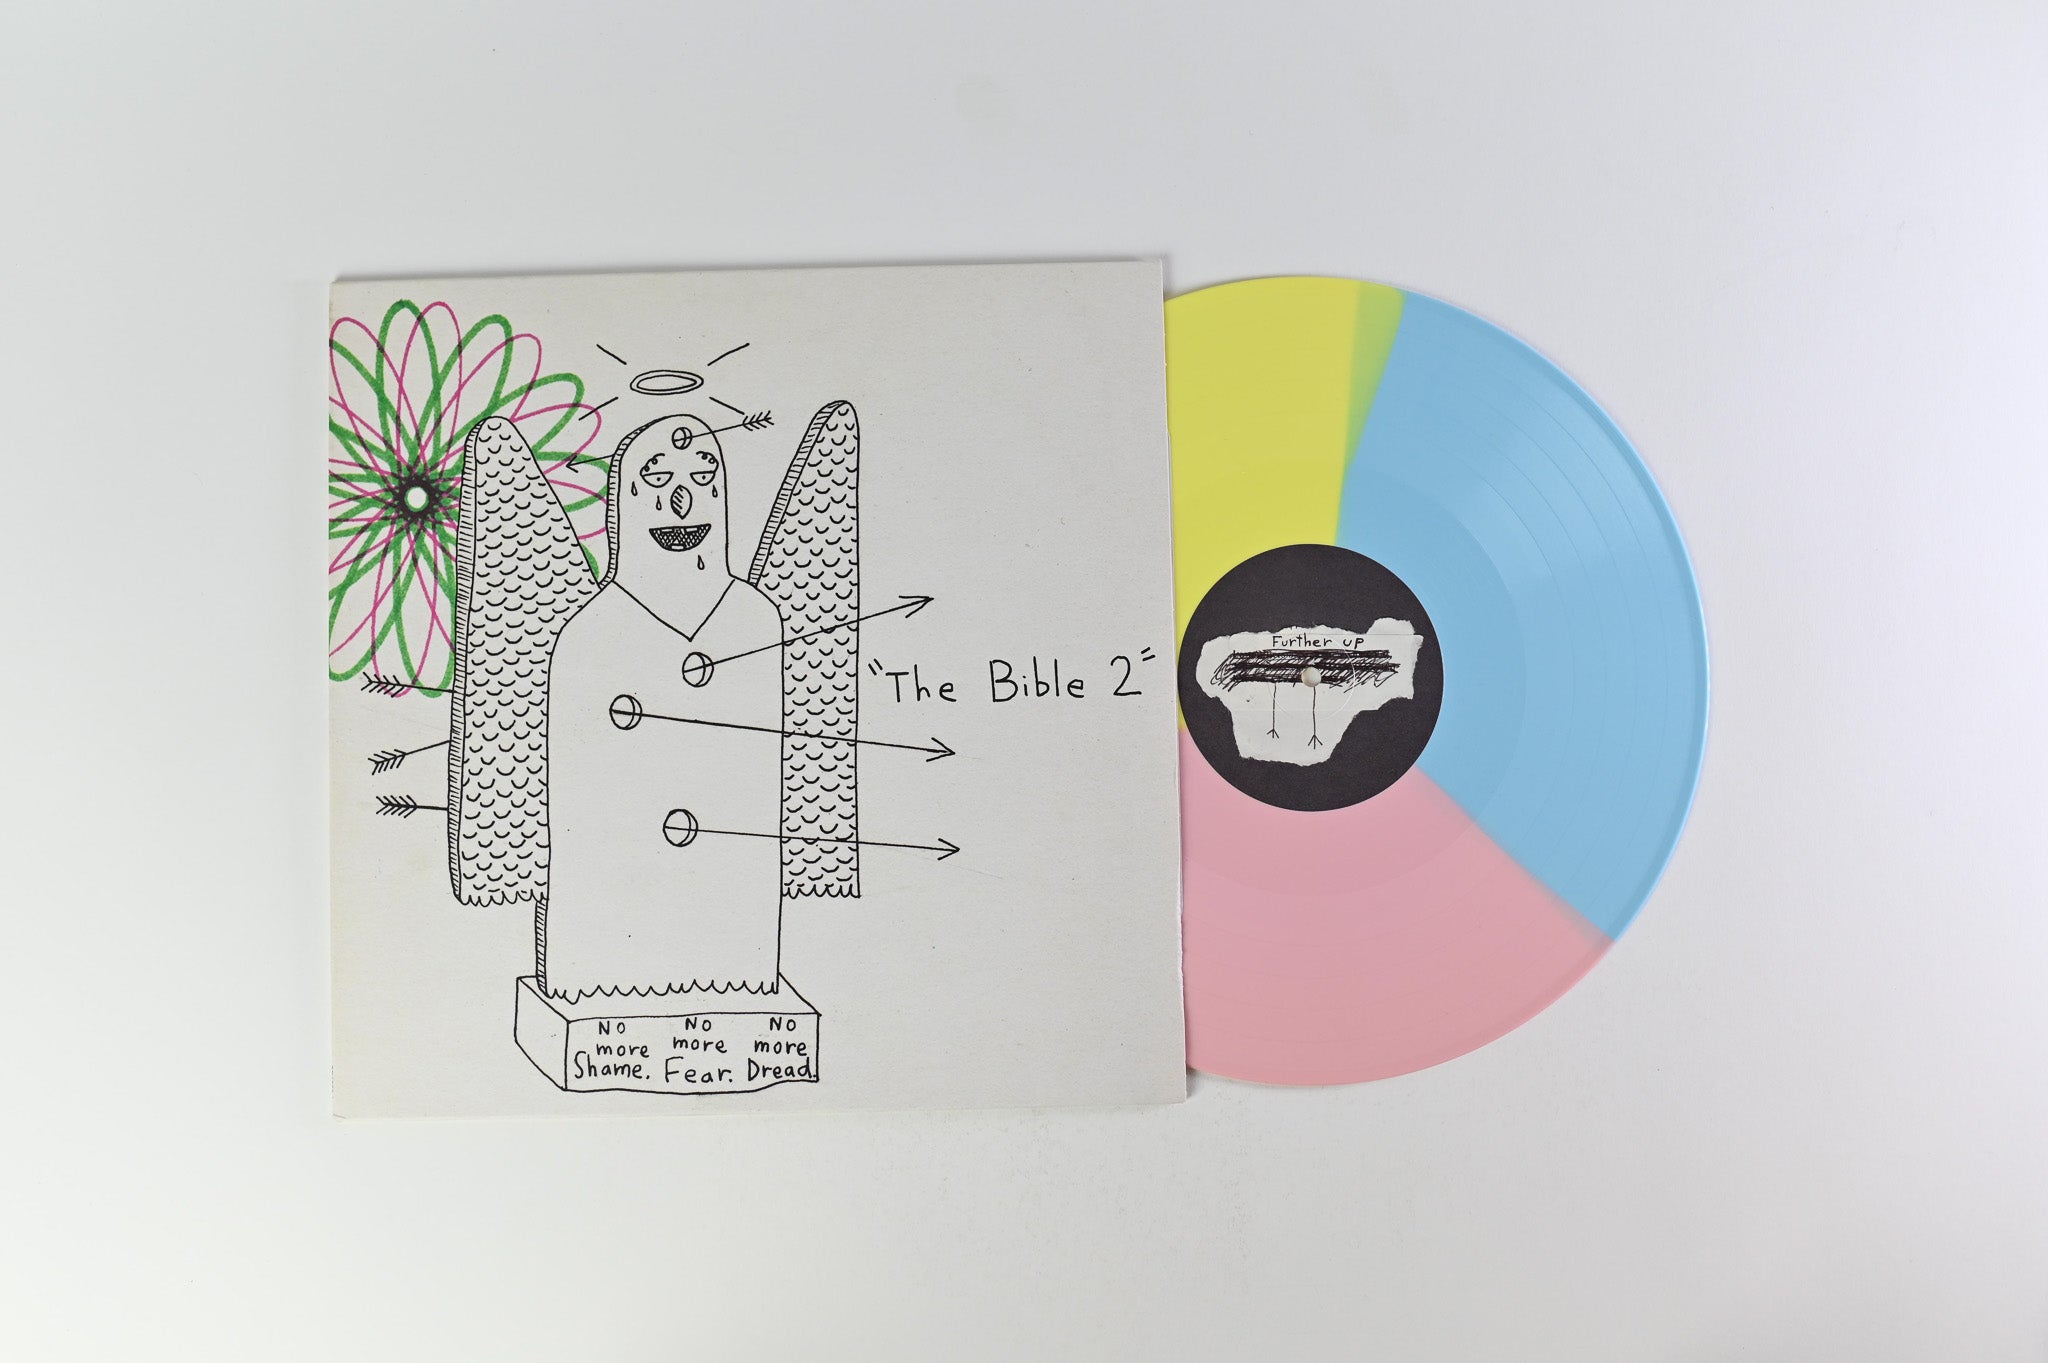 AJJ - The Bible 2 on SideOneDummy Tri Color Vinyl